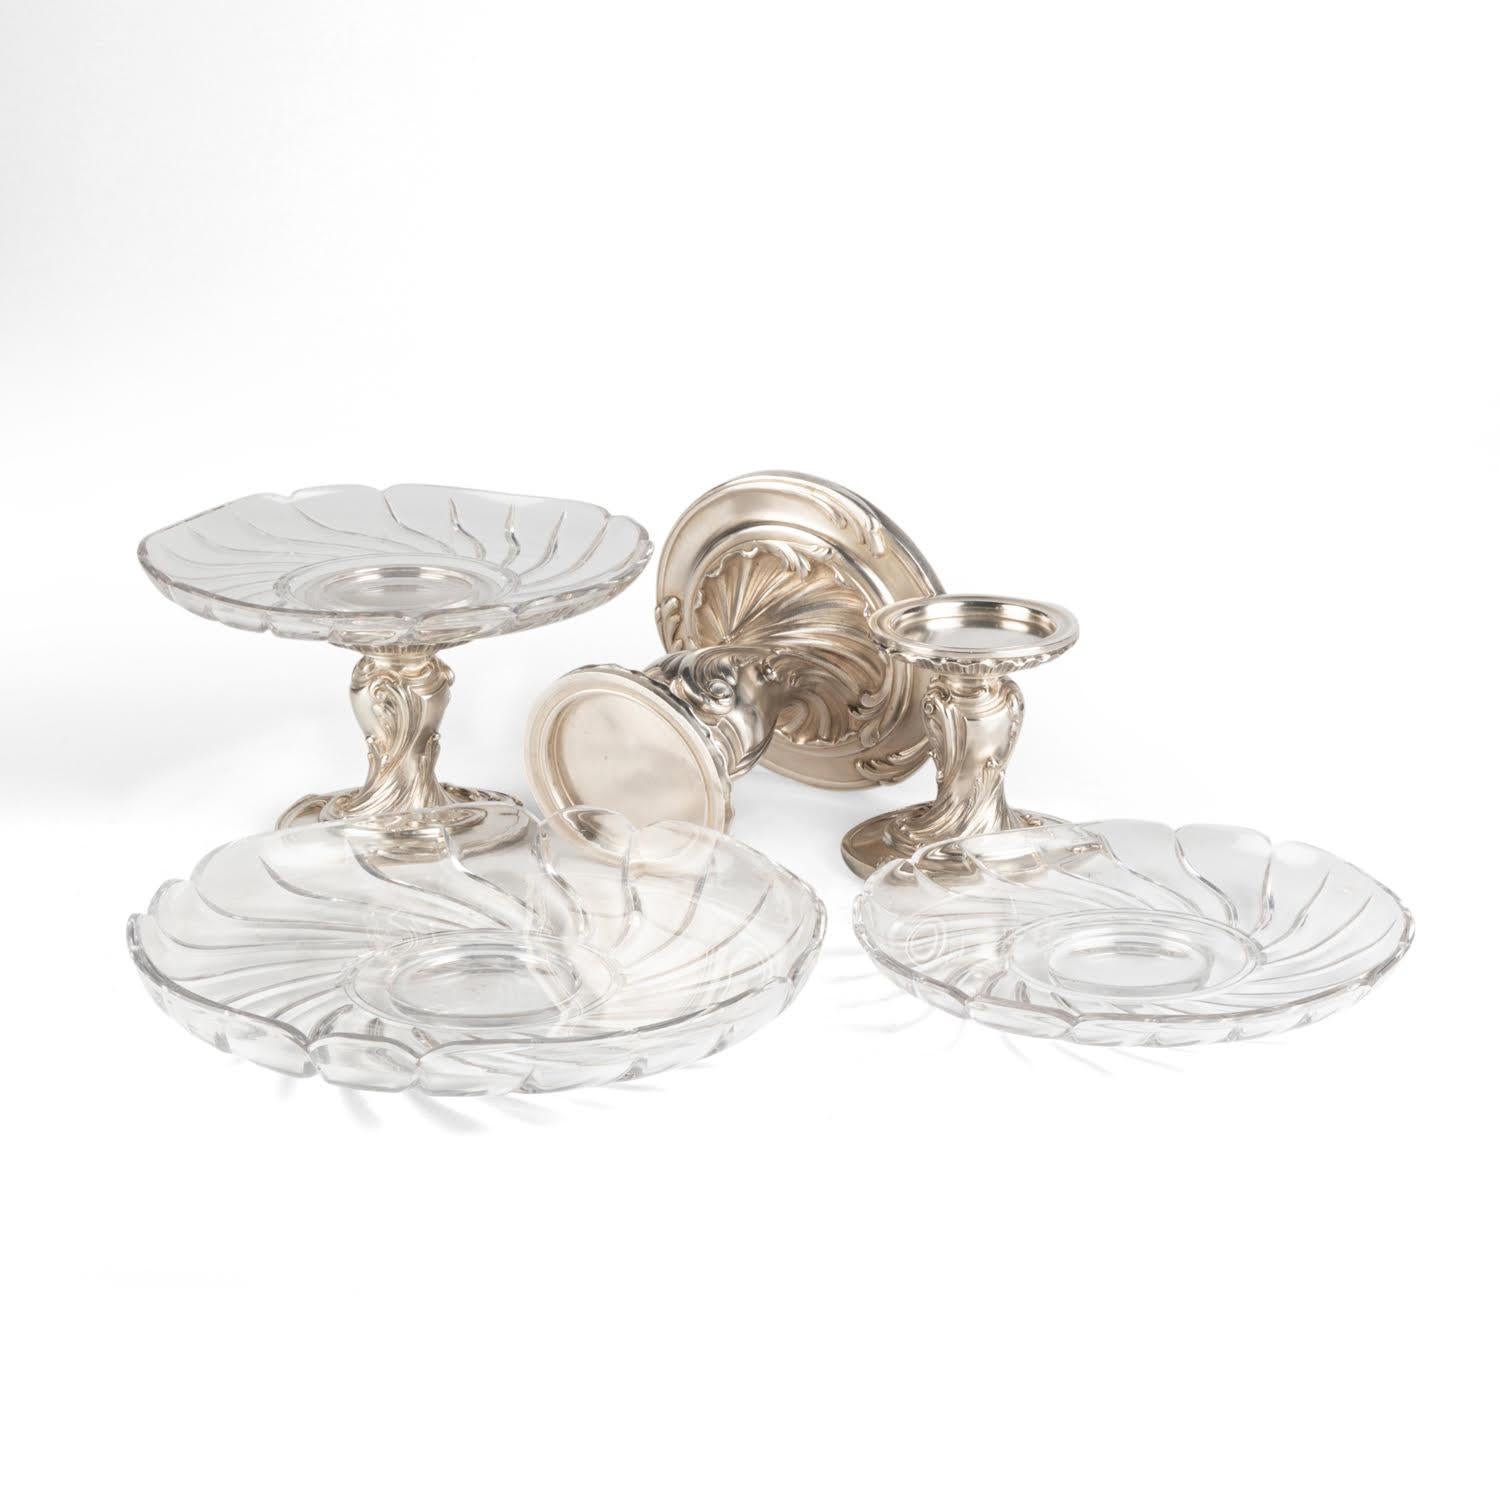 Plated Set of Three Christofle Cake Stands, Napoleon III Period. For Sale